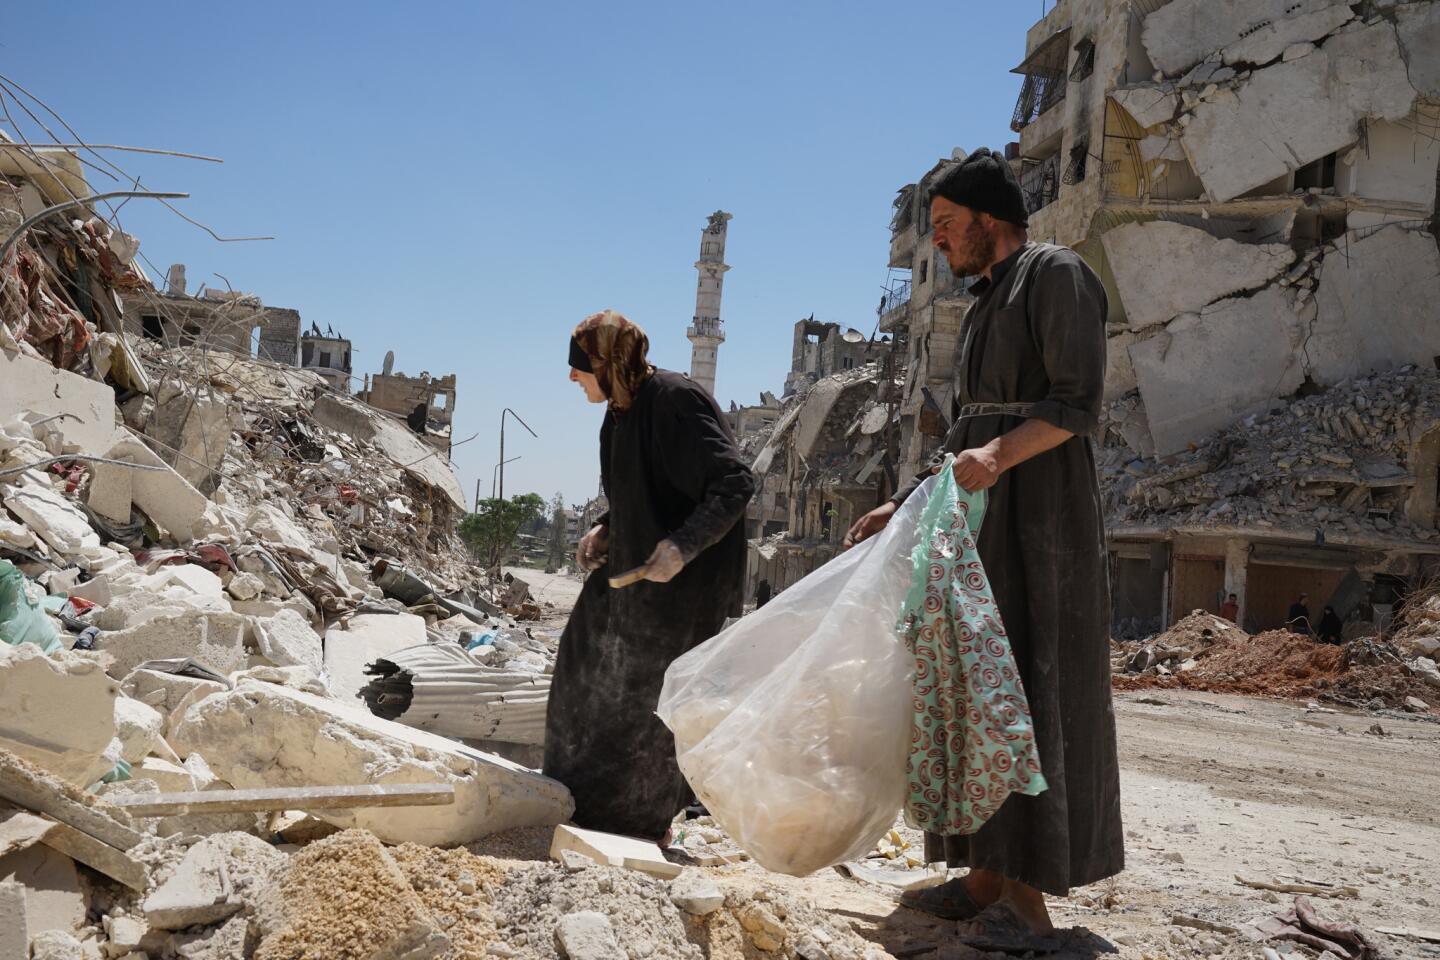 Aleppo's Salahuddin neighborhood was divided between opposition and government forces until rebels left in December. Now, many former residents are coming back to see what became of their homes. Others come to pick through the rubble.